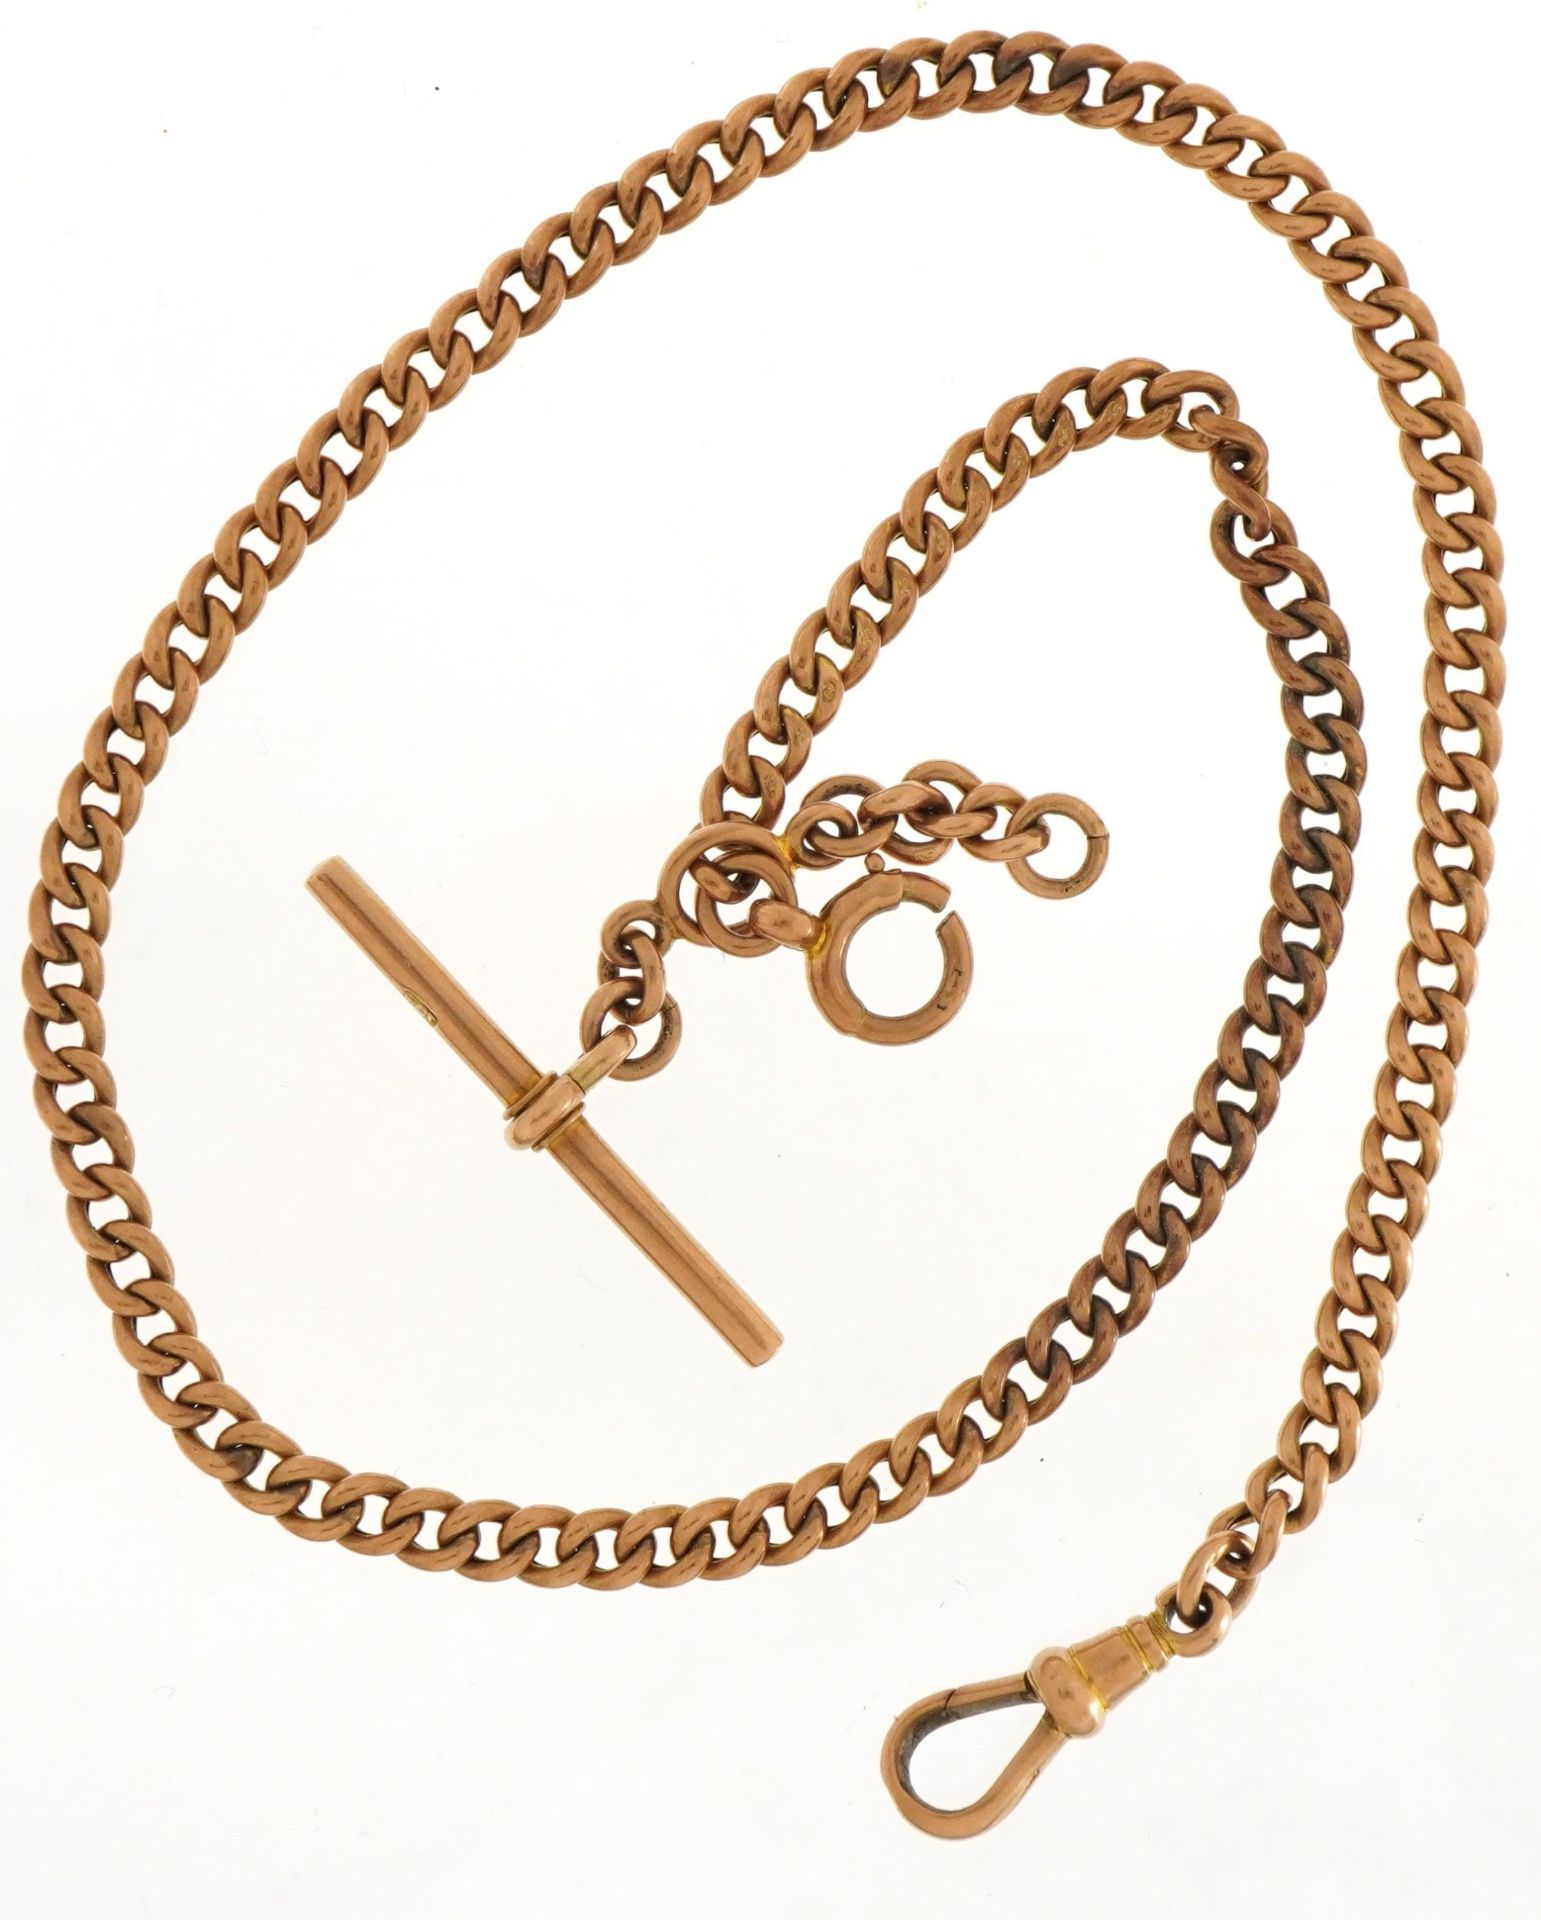 9ct rose gold watch chain with T bar, 37cm in length, 14.0g - Image 2 of 3